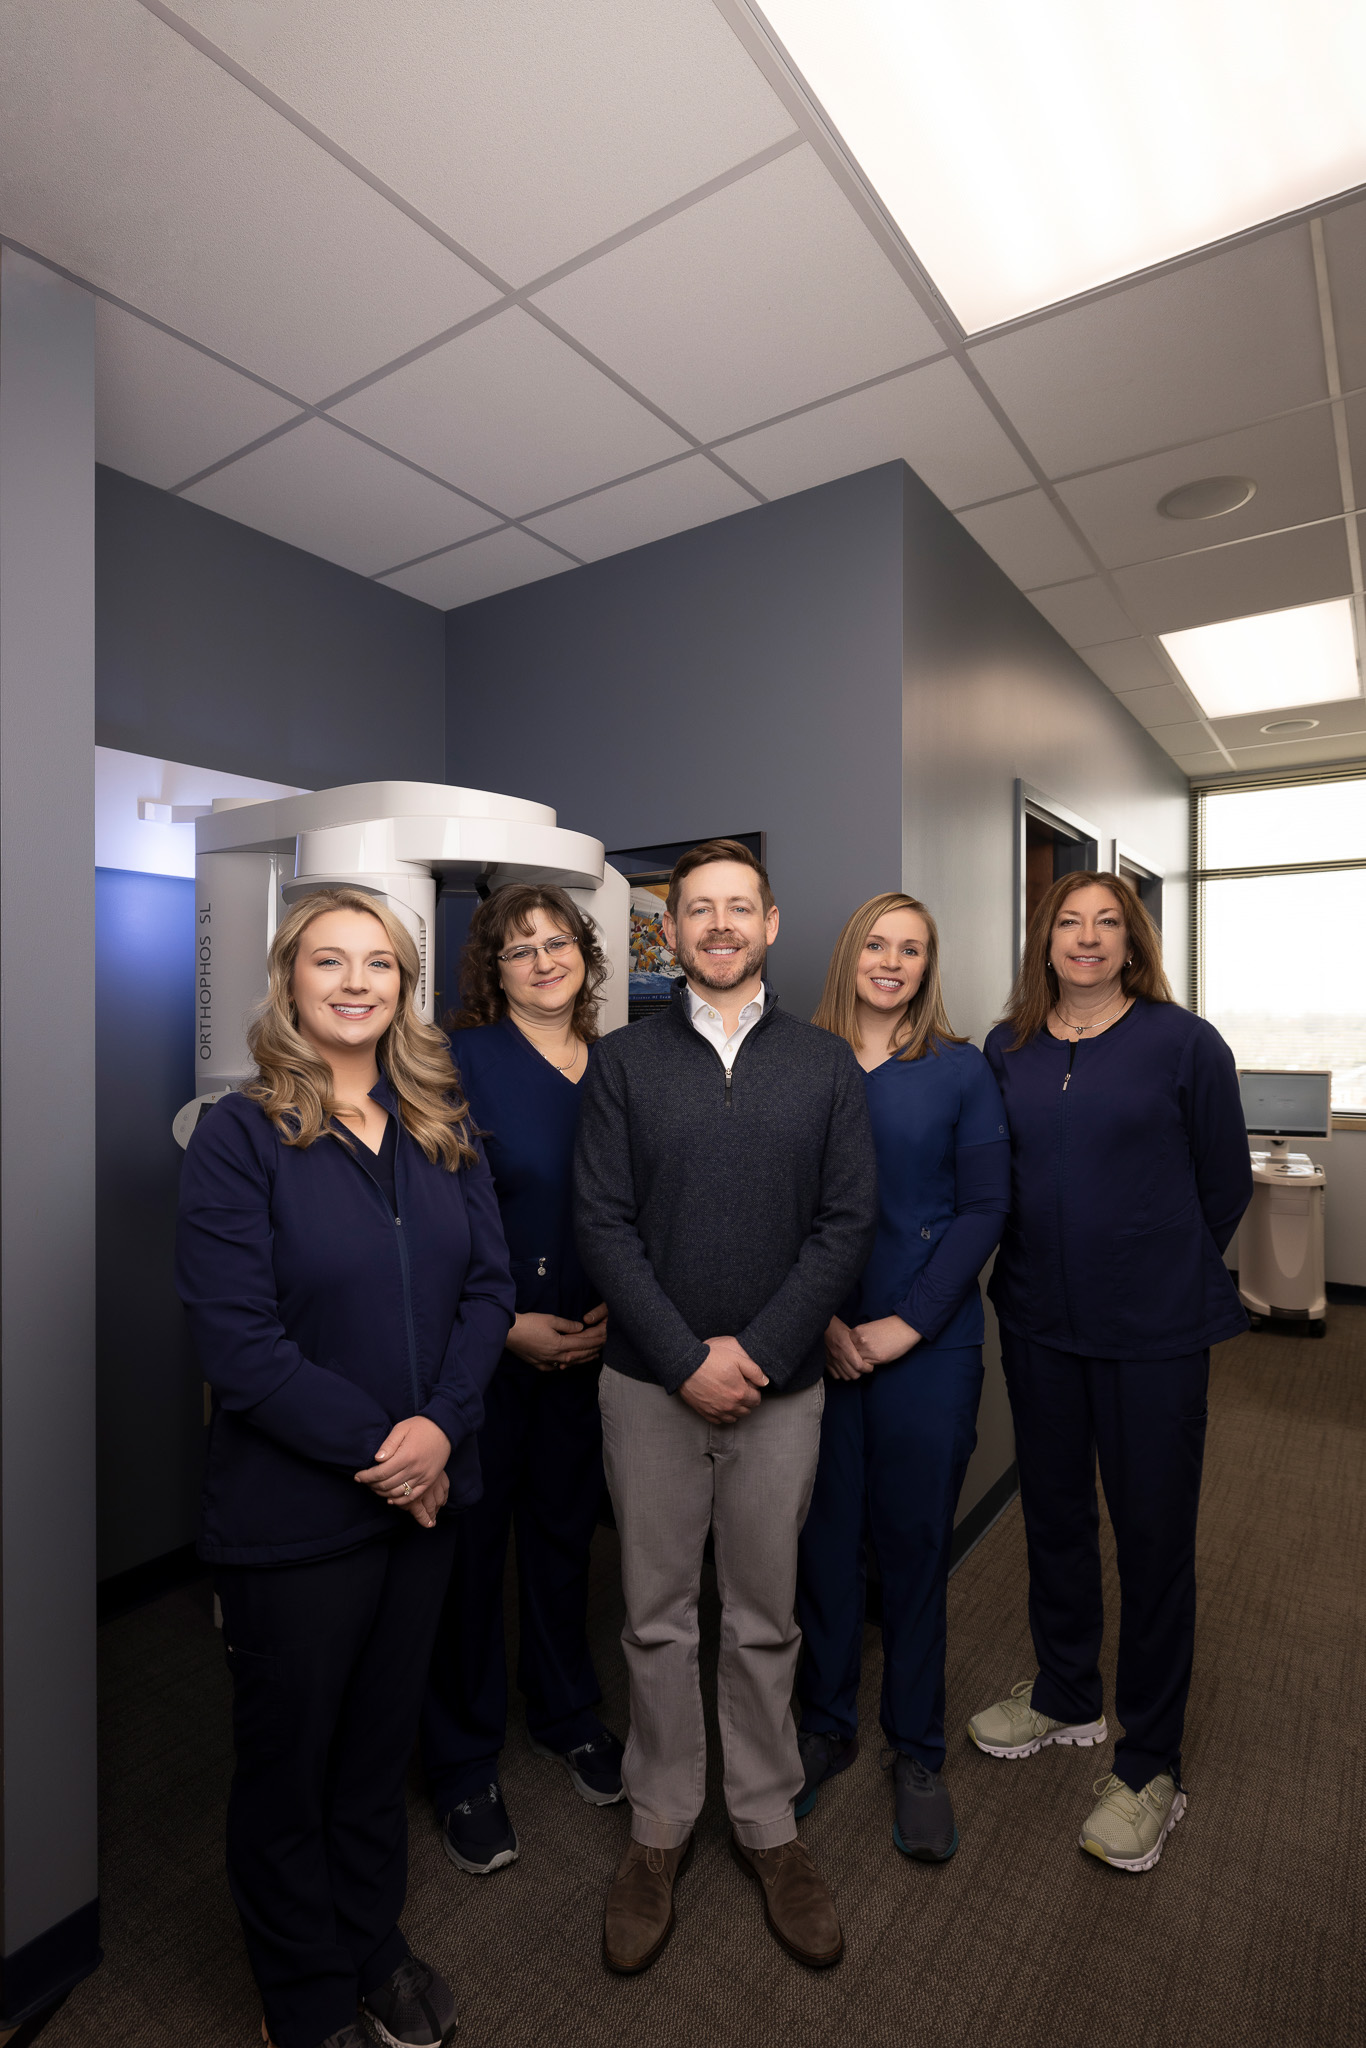 Portrait-oriented team photo at Dr. Kevin Burgdorf's dental practice, showcasing the dedicated and professional staff.